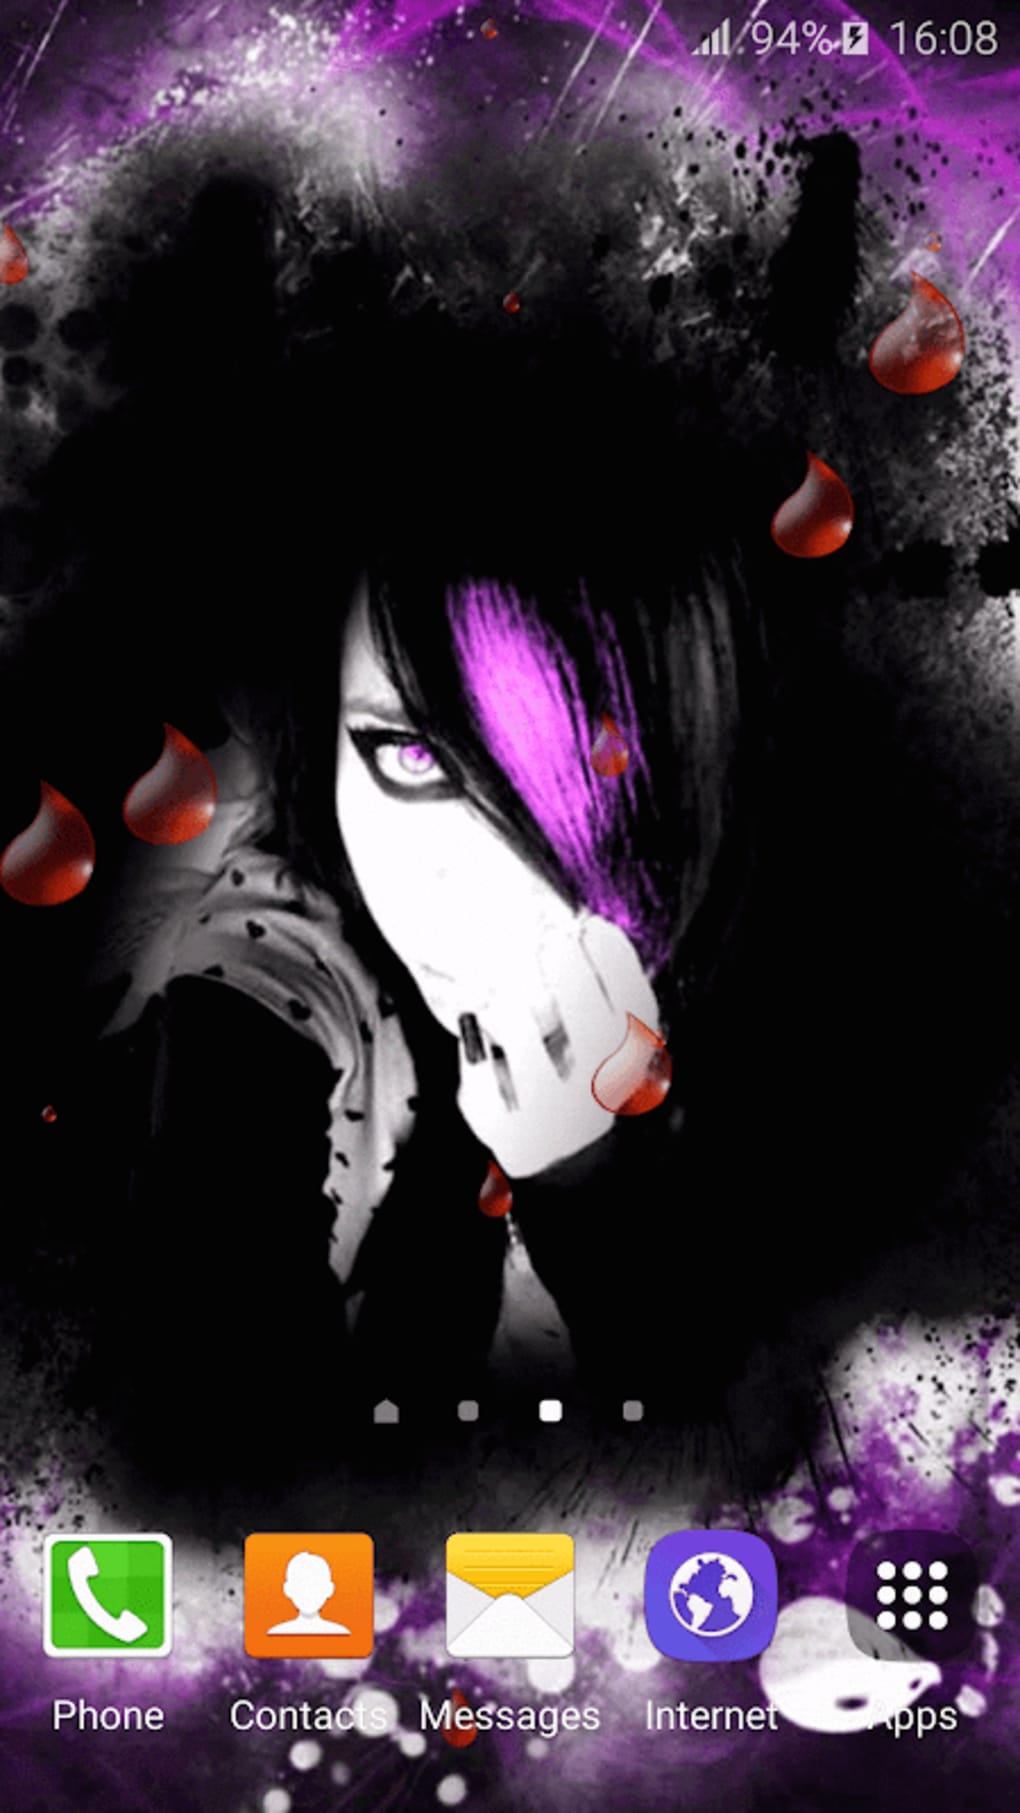 Emo Wallpapers APK Download 2023 - Free - 9Apps